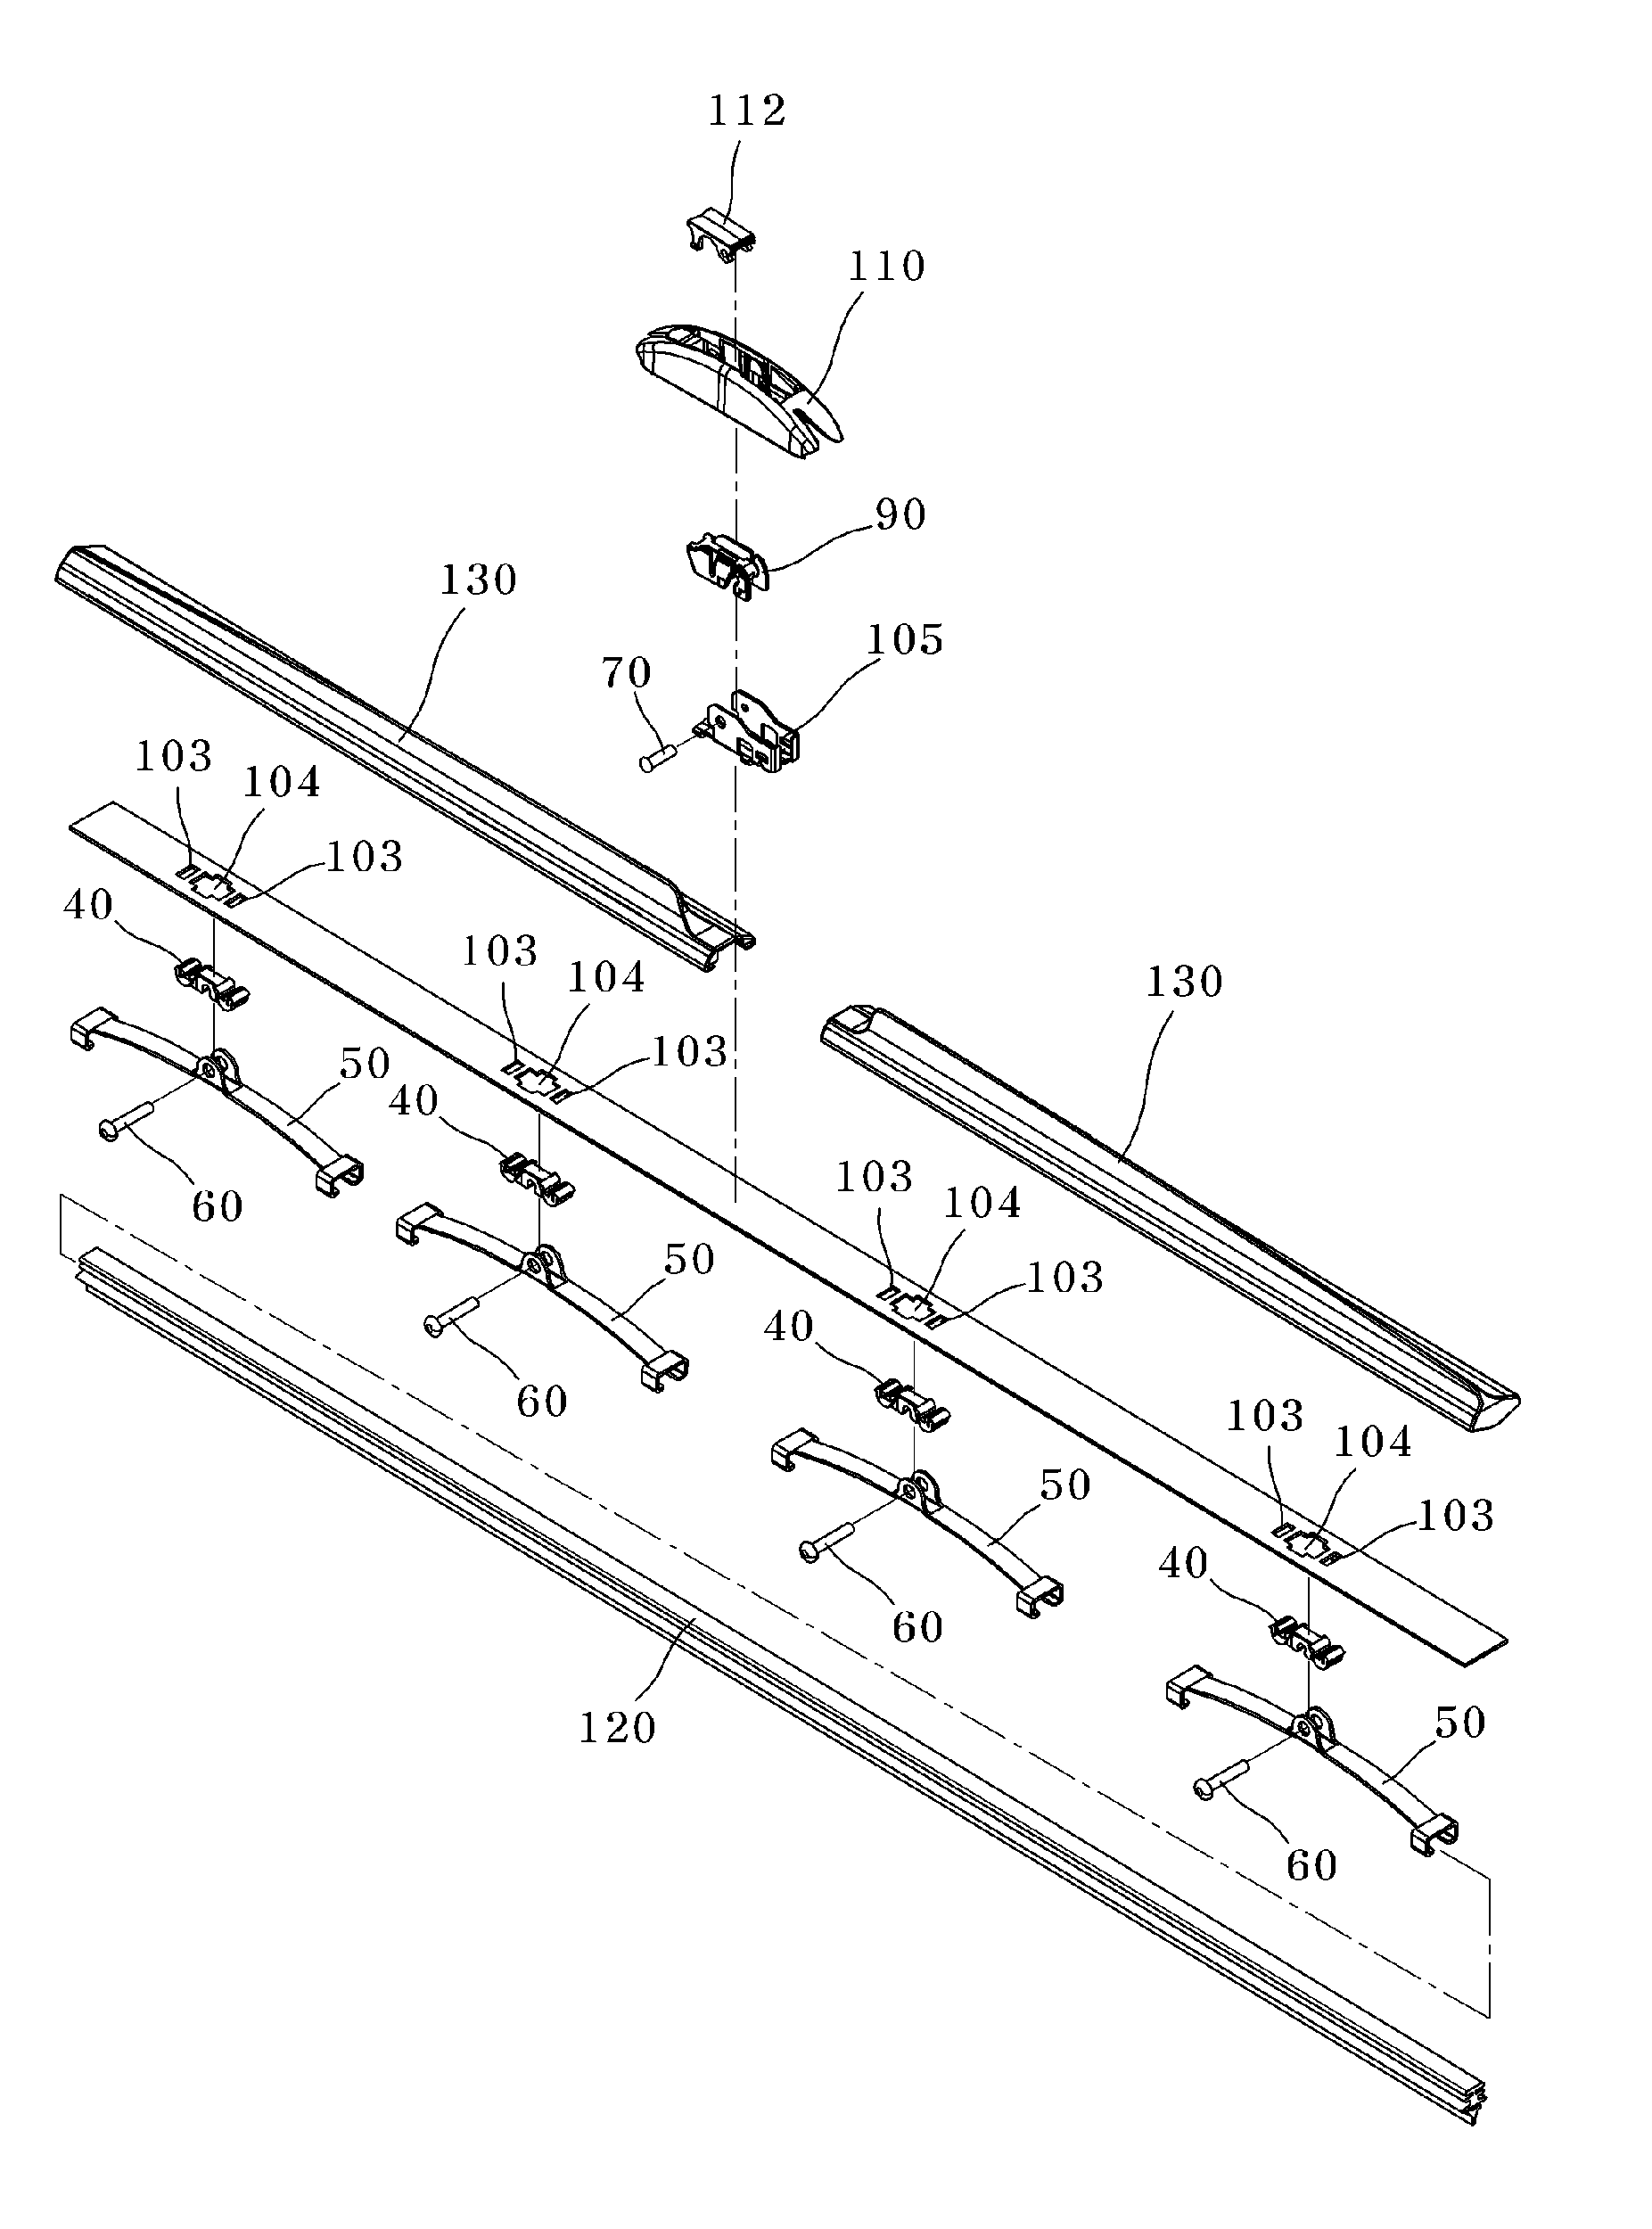 Wiper blade assembly having rotatable auxiliary beam